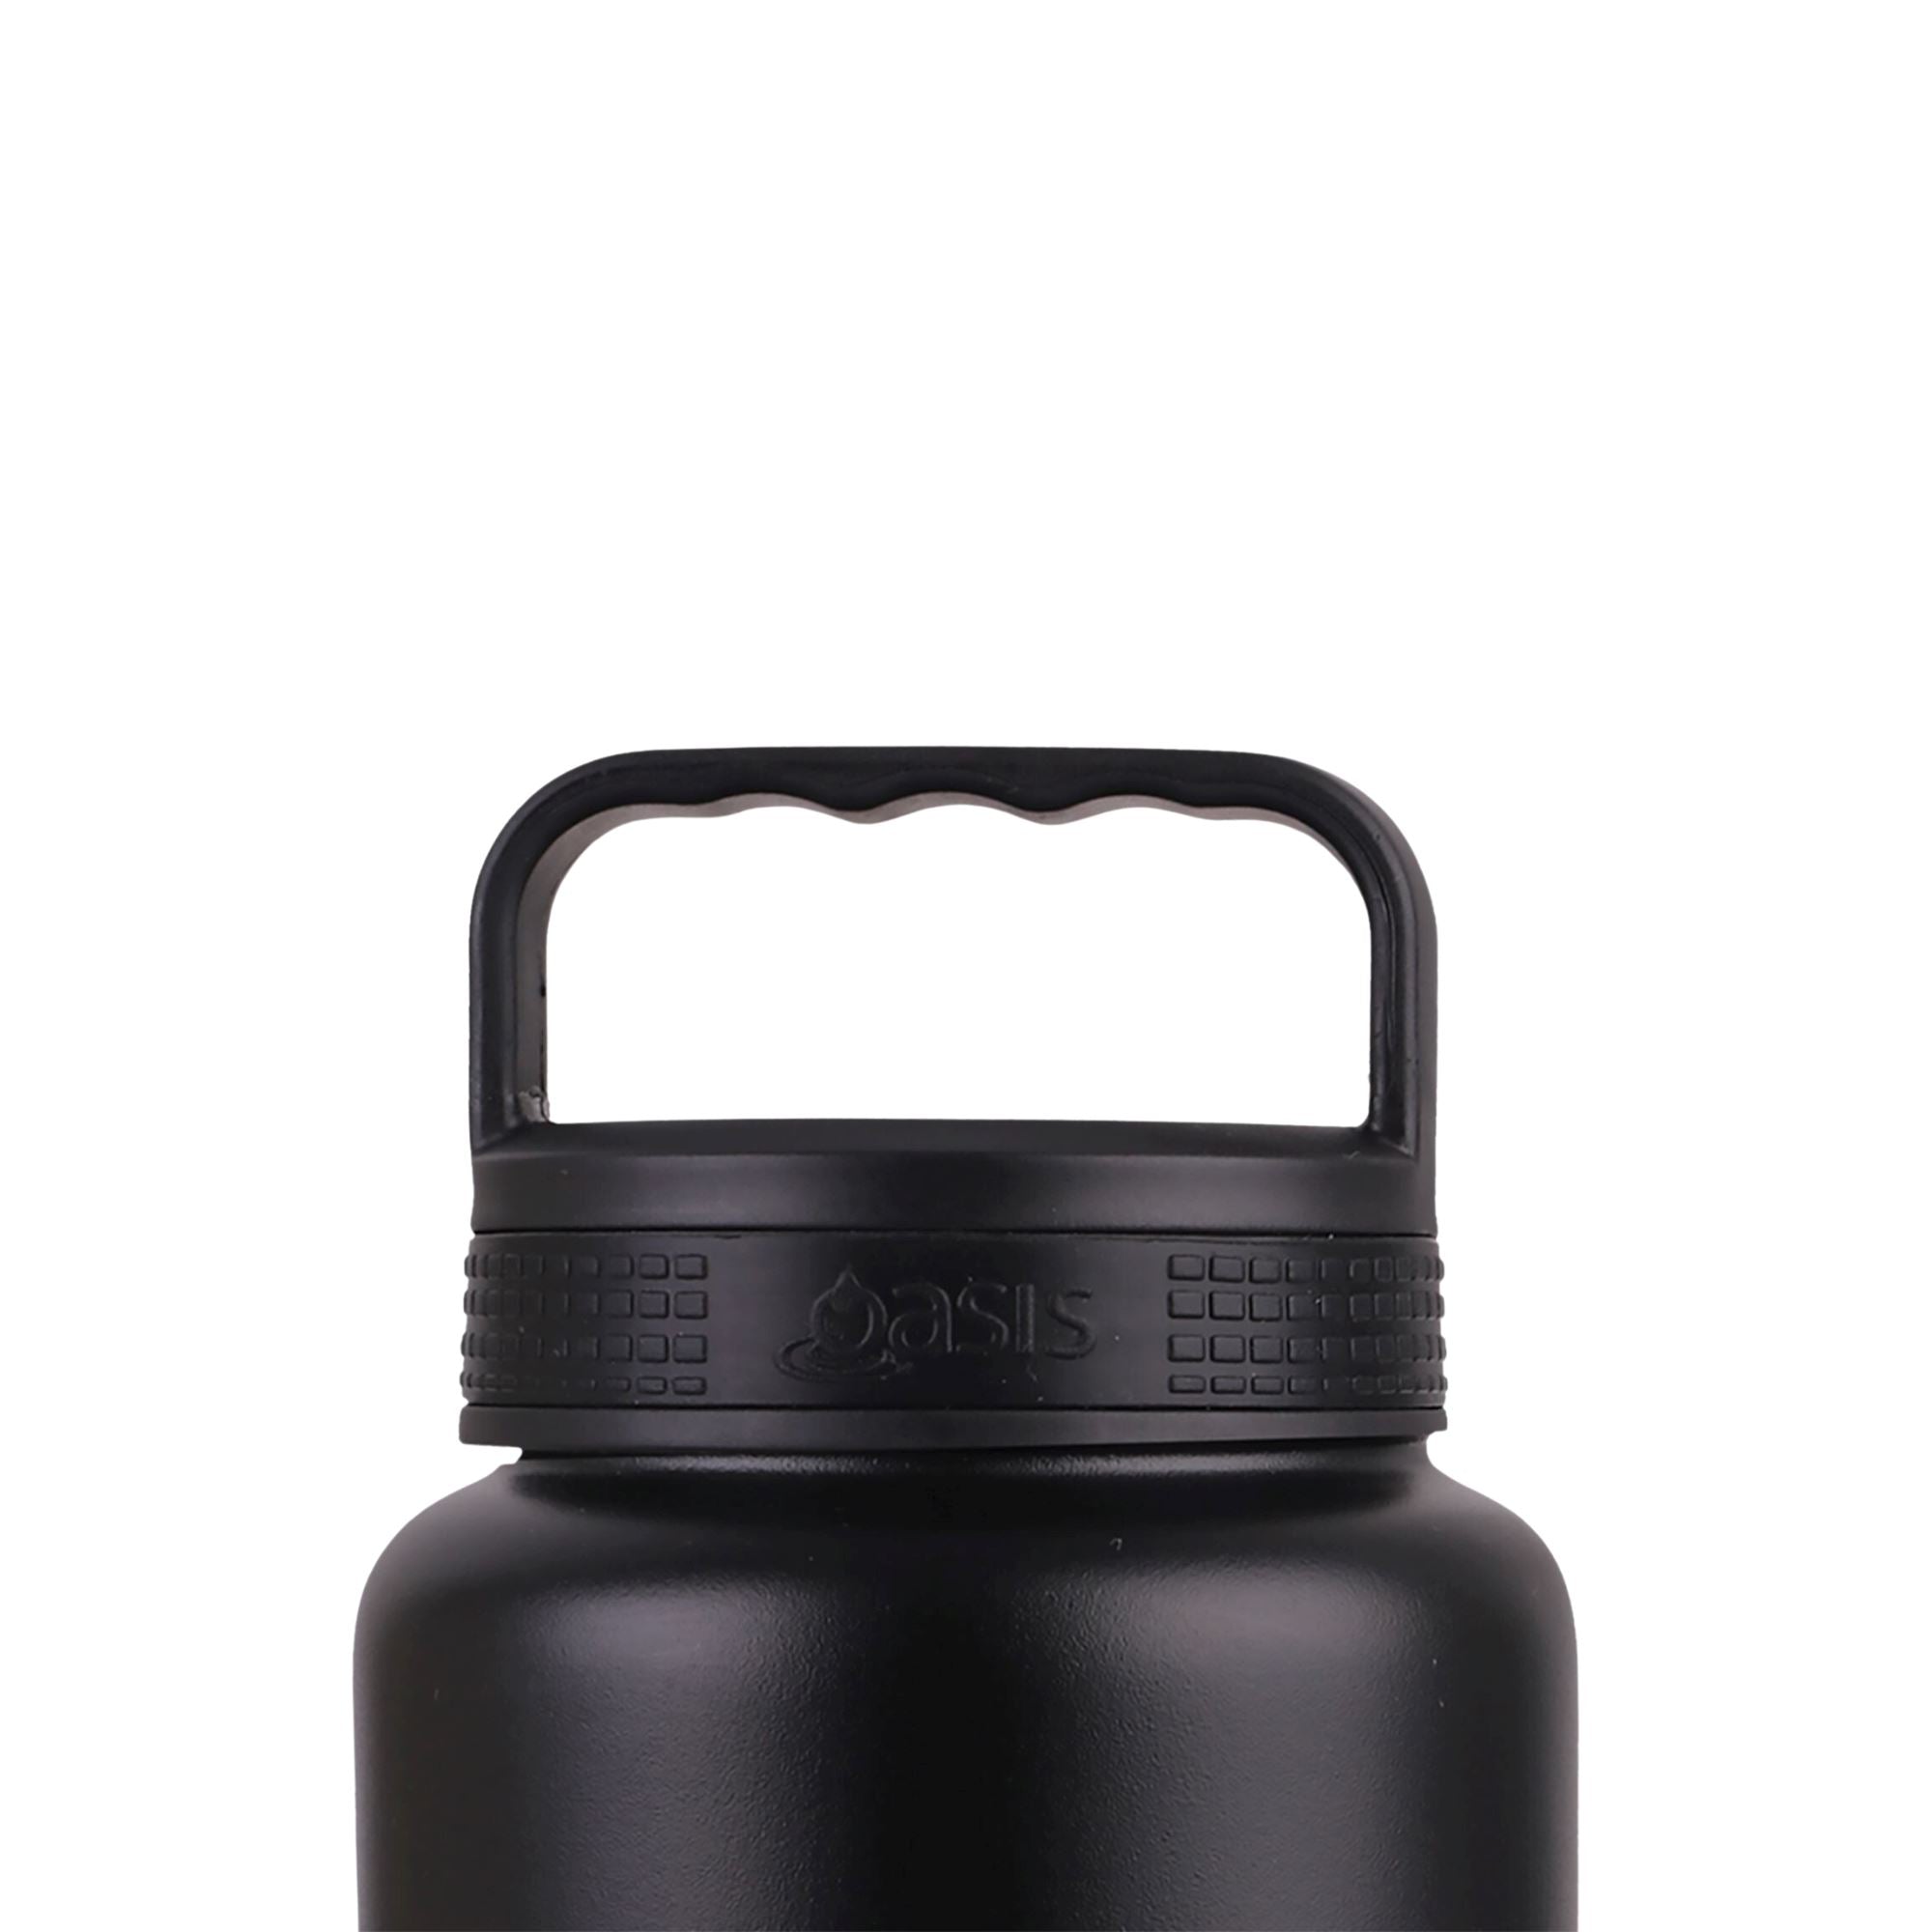 Insulated Titan Bottle Replacement Lid Insulated Water Bottle Oasis 